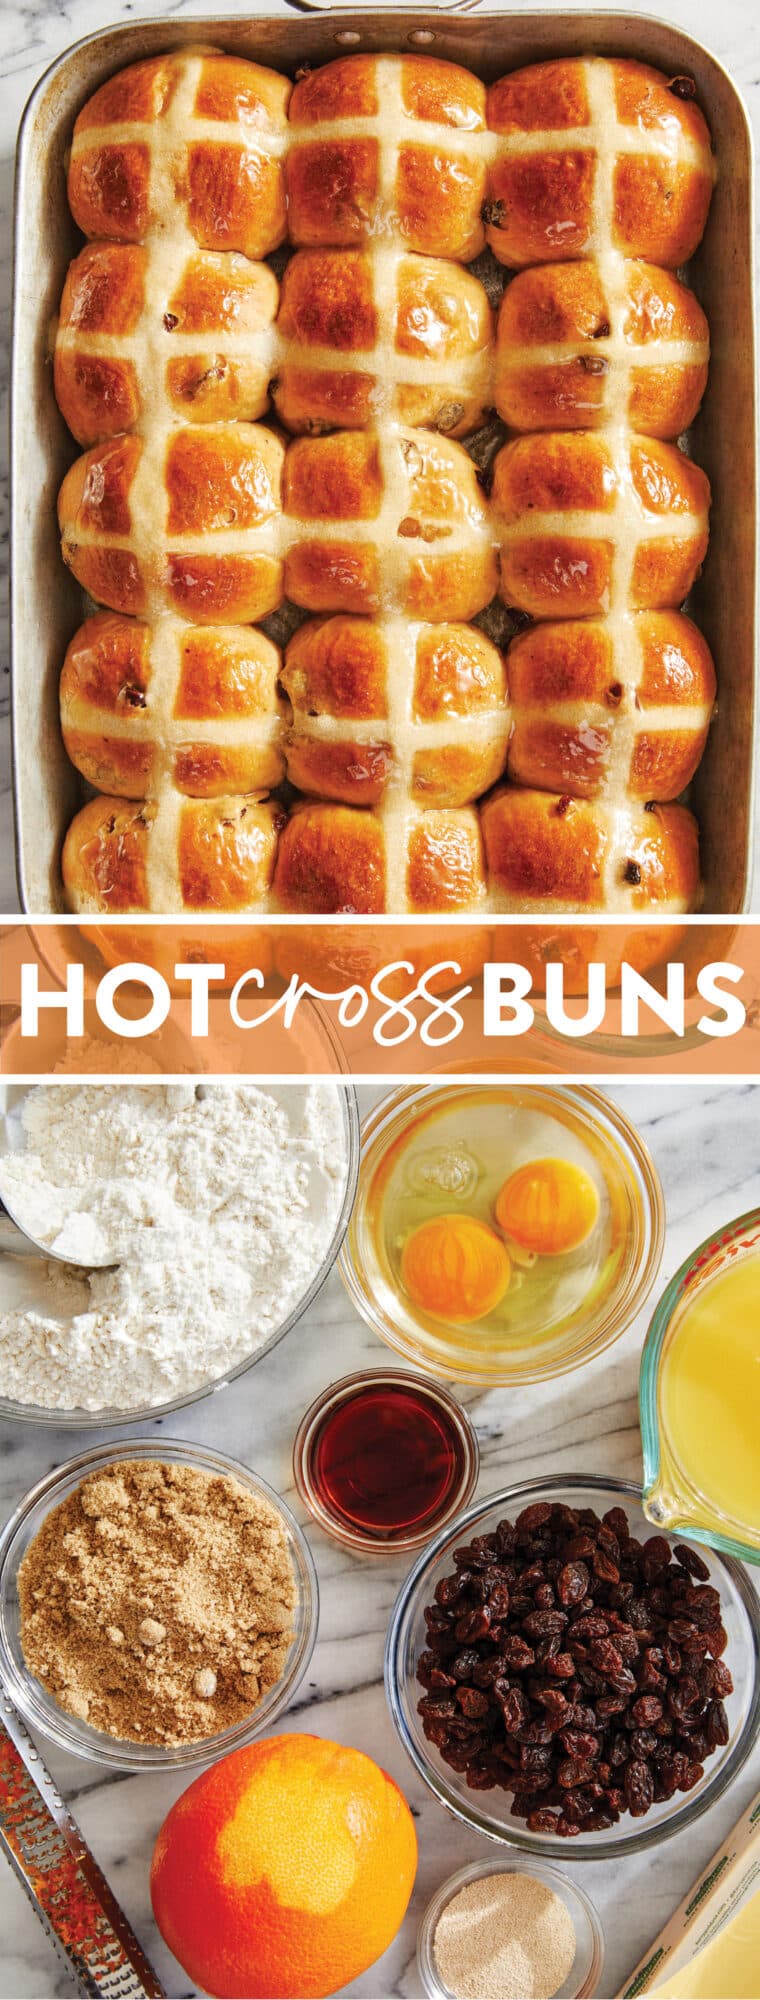 Hot Cross Buns - Homemade hot cross buns that are super soft, fluffy + a little sweet.  An absolute must for Easter - they will be gone very quickly!